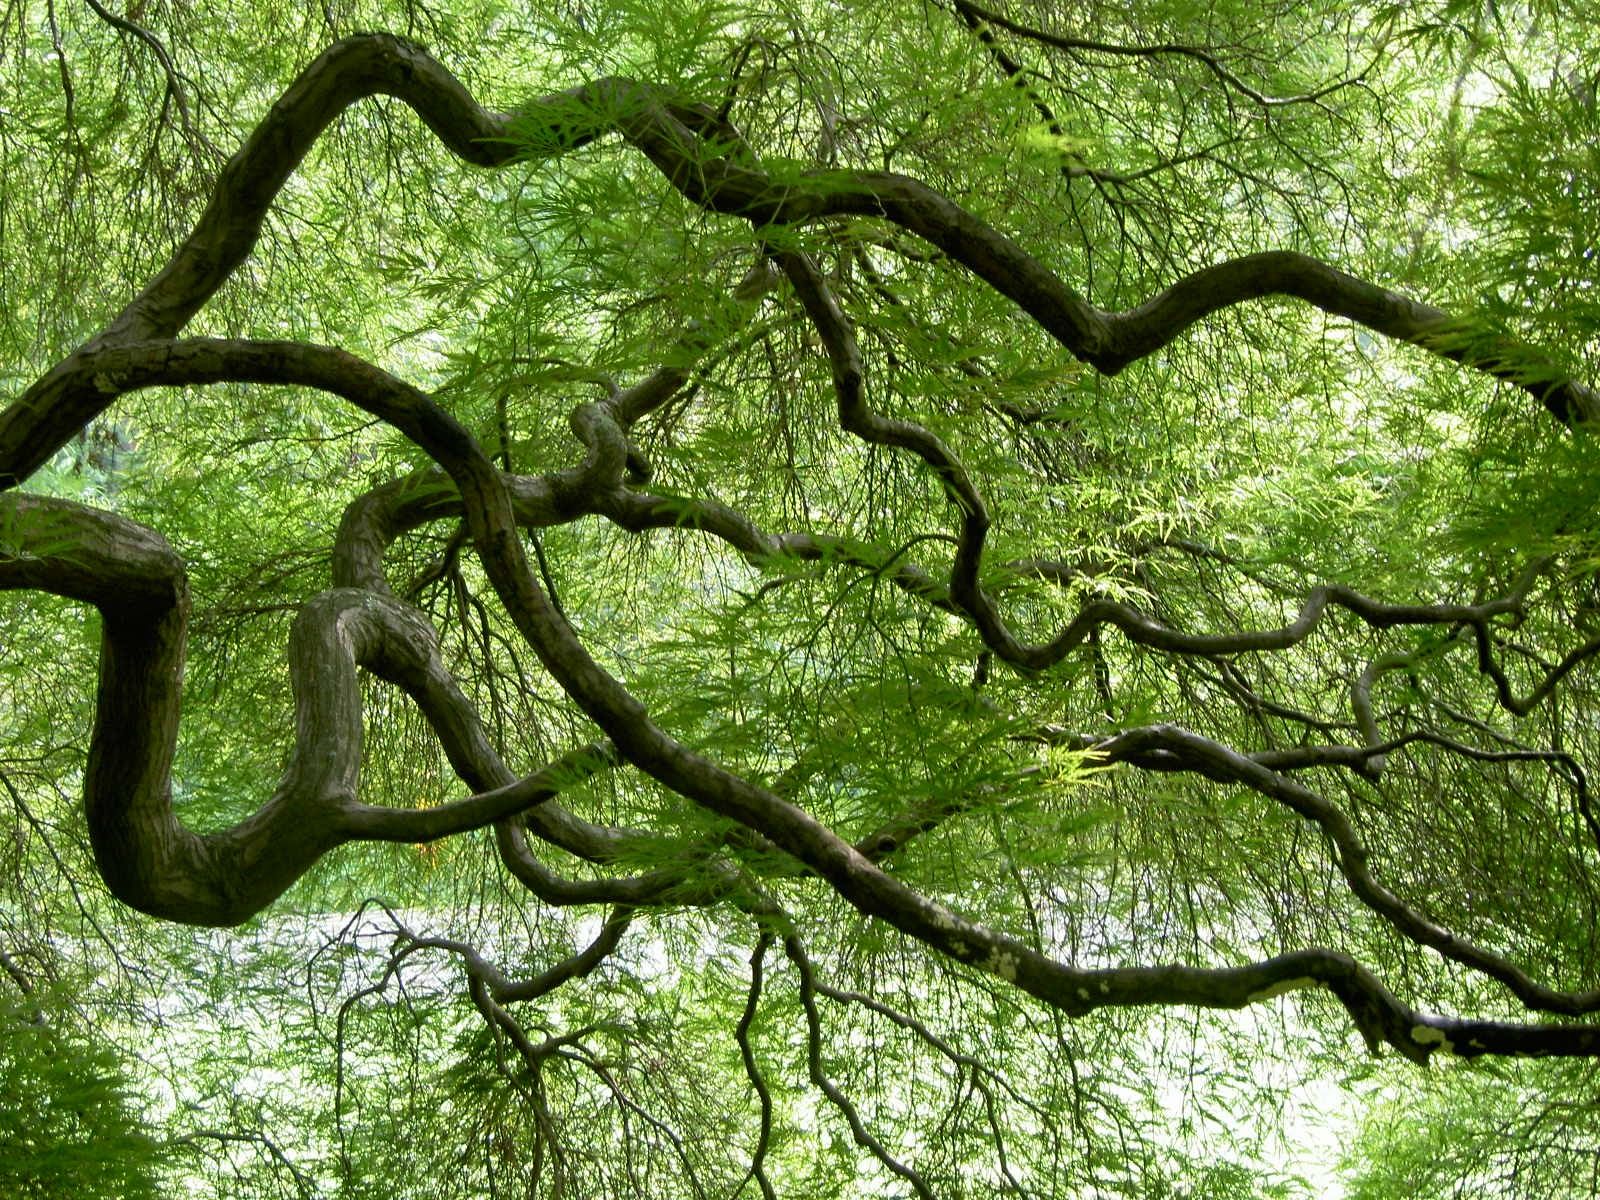 the twisting limbs of a tree with green leaves.